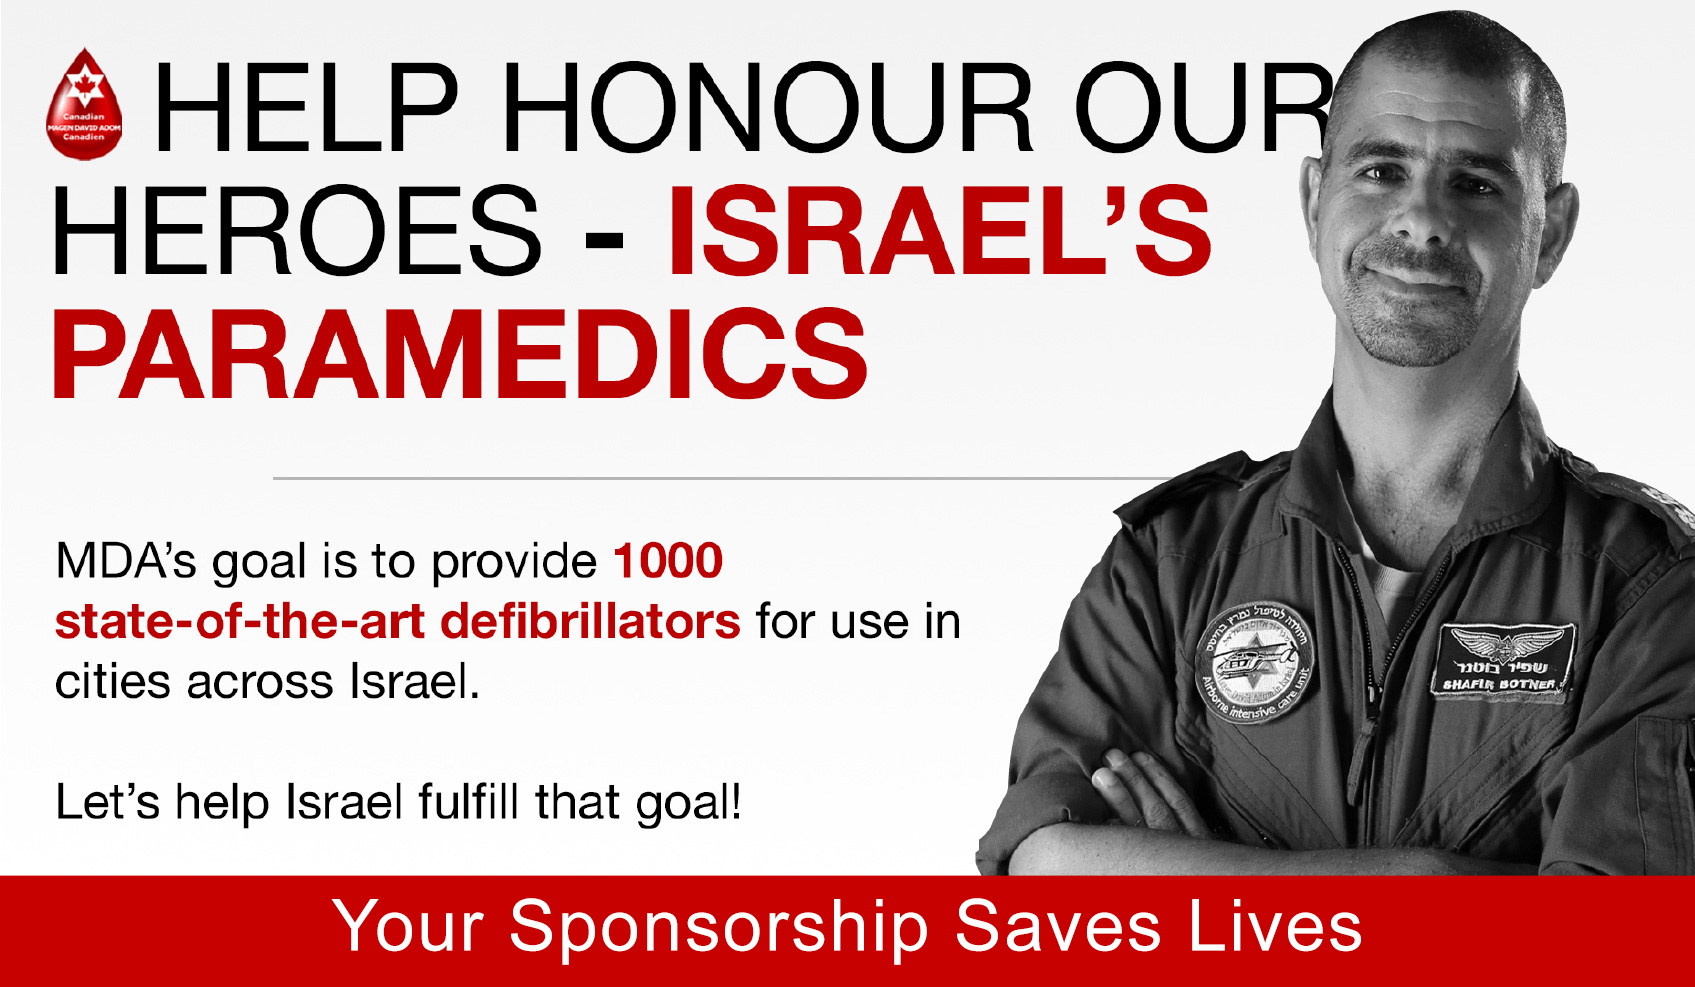 MDa's goal is to provide 1000 state-of-the-art defibrillators for use in cities acros Israel